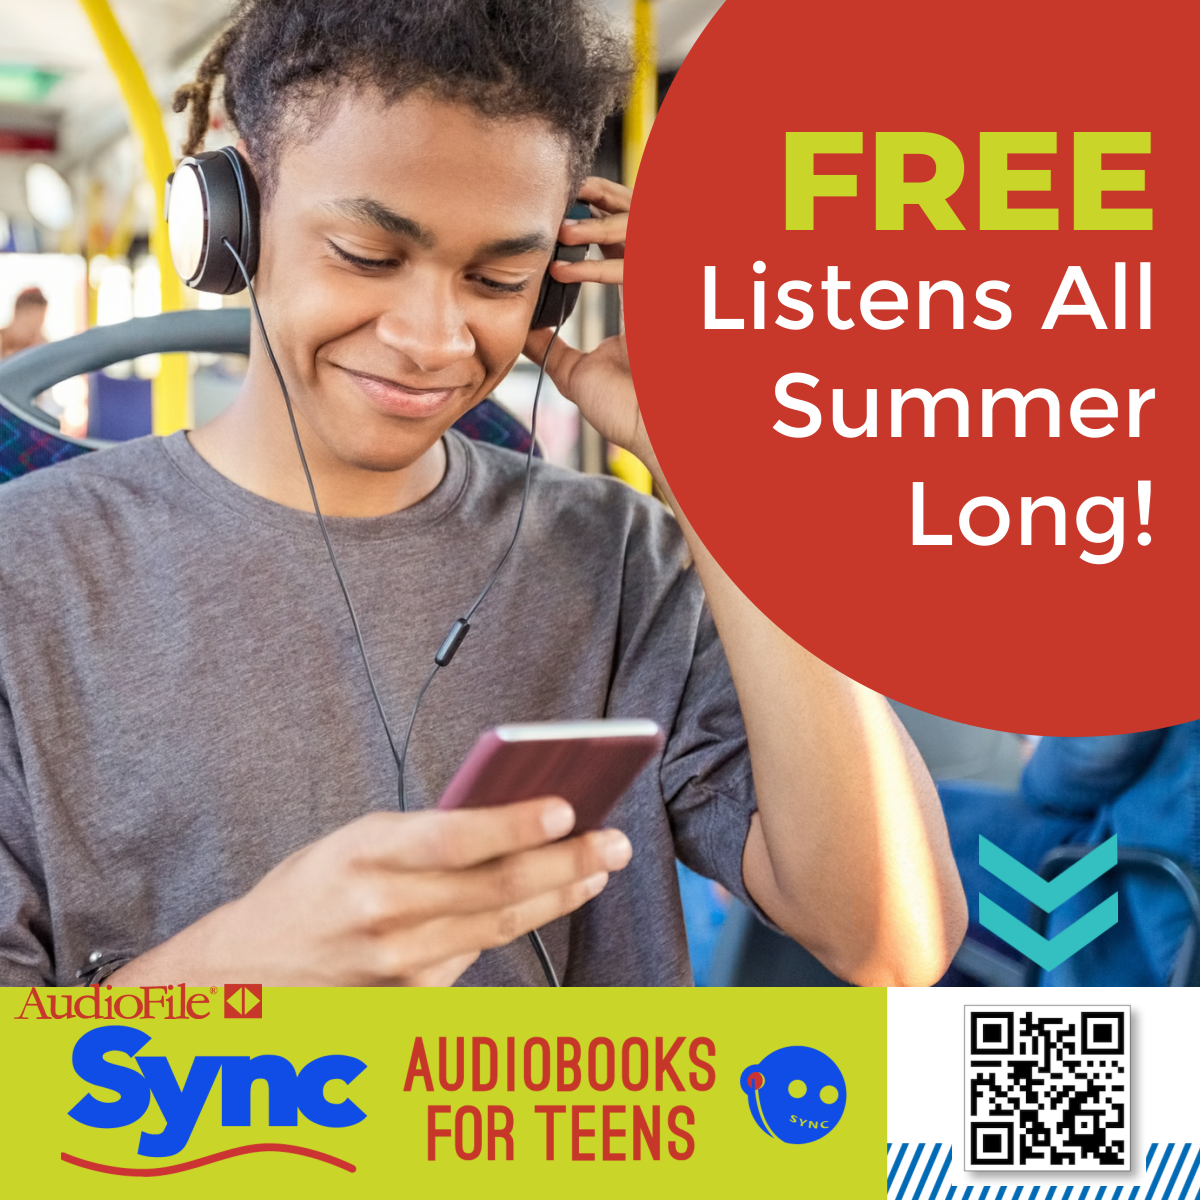 Sync audiobooks for teens. Free listens all summer long. Image of a teen boy wearing headphones.